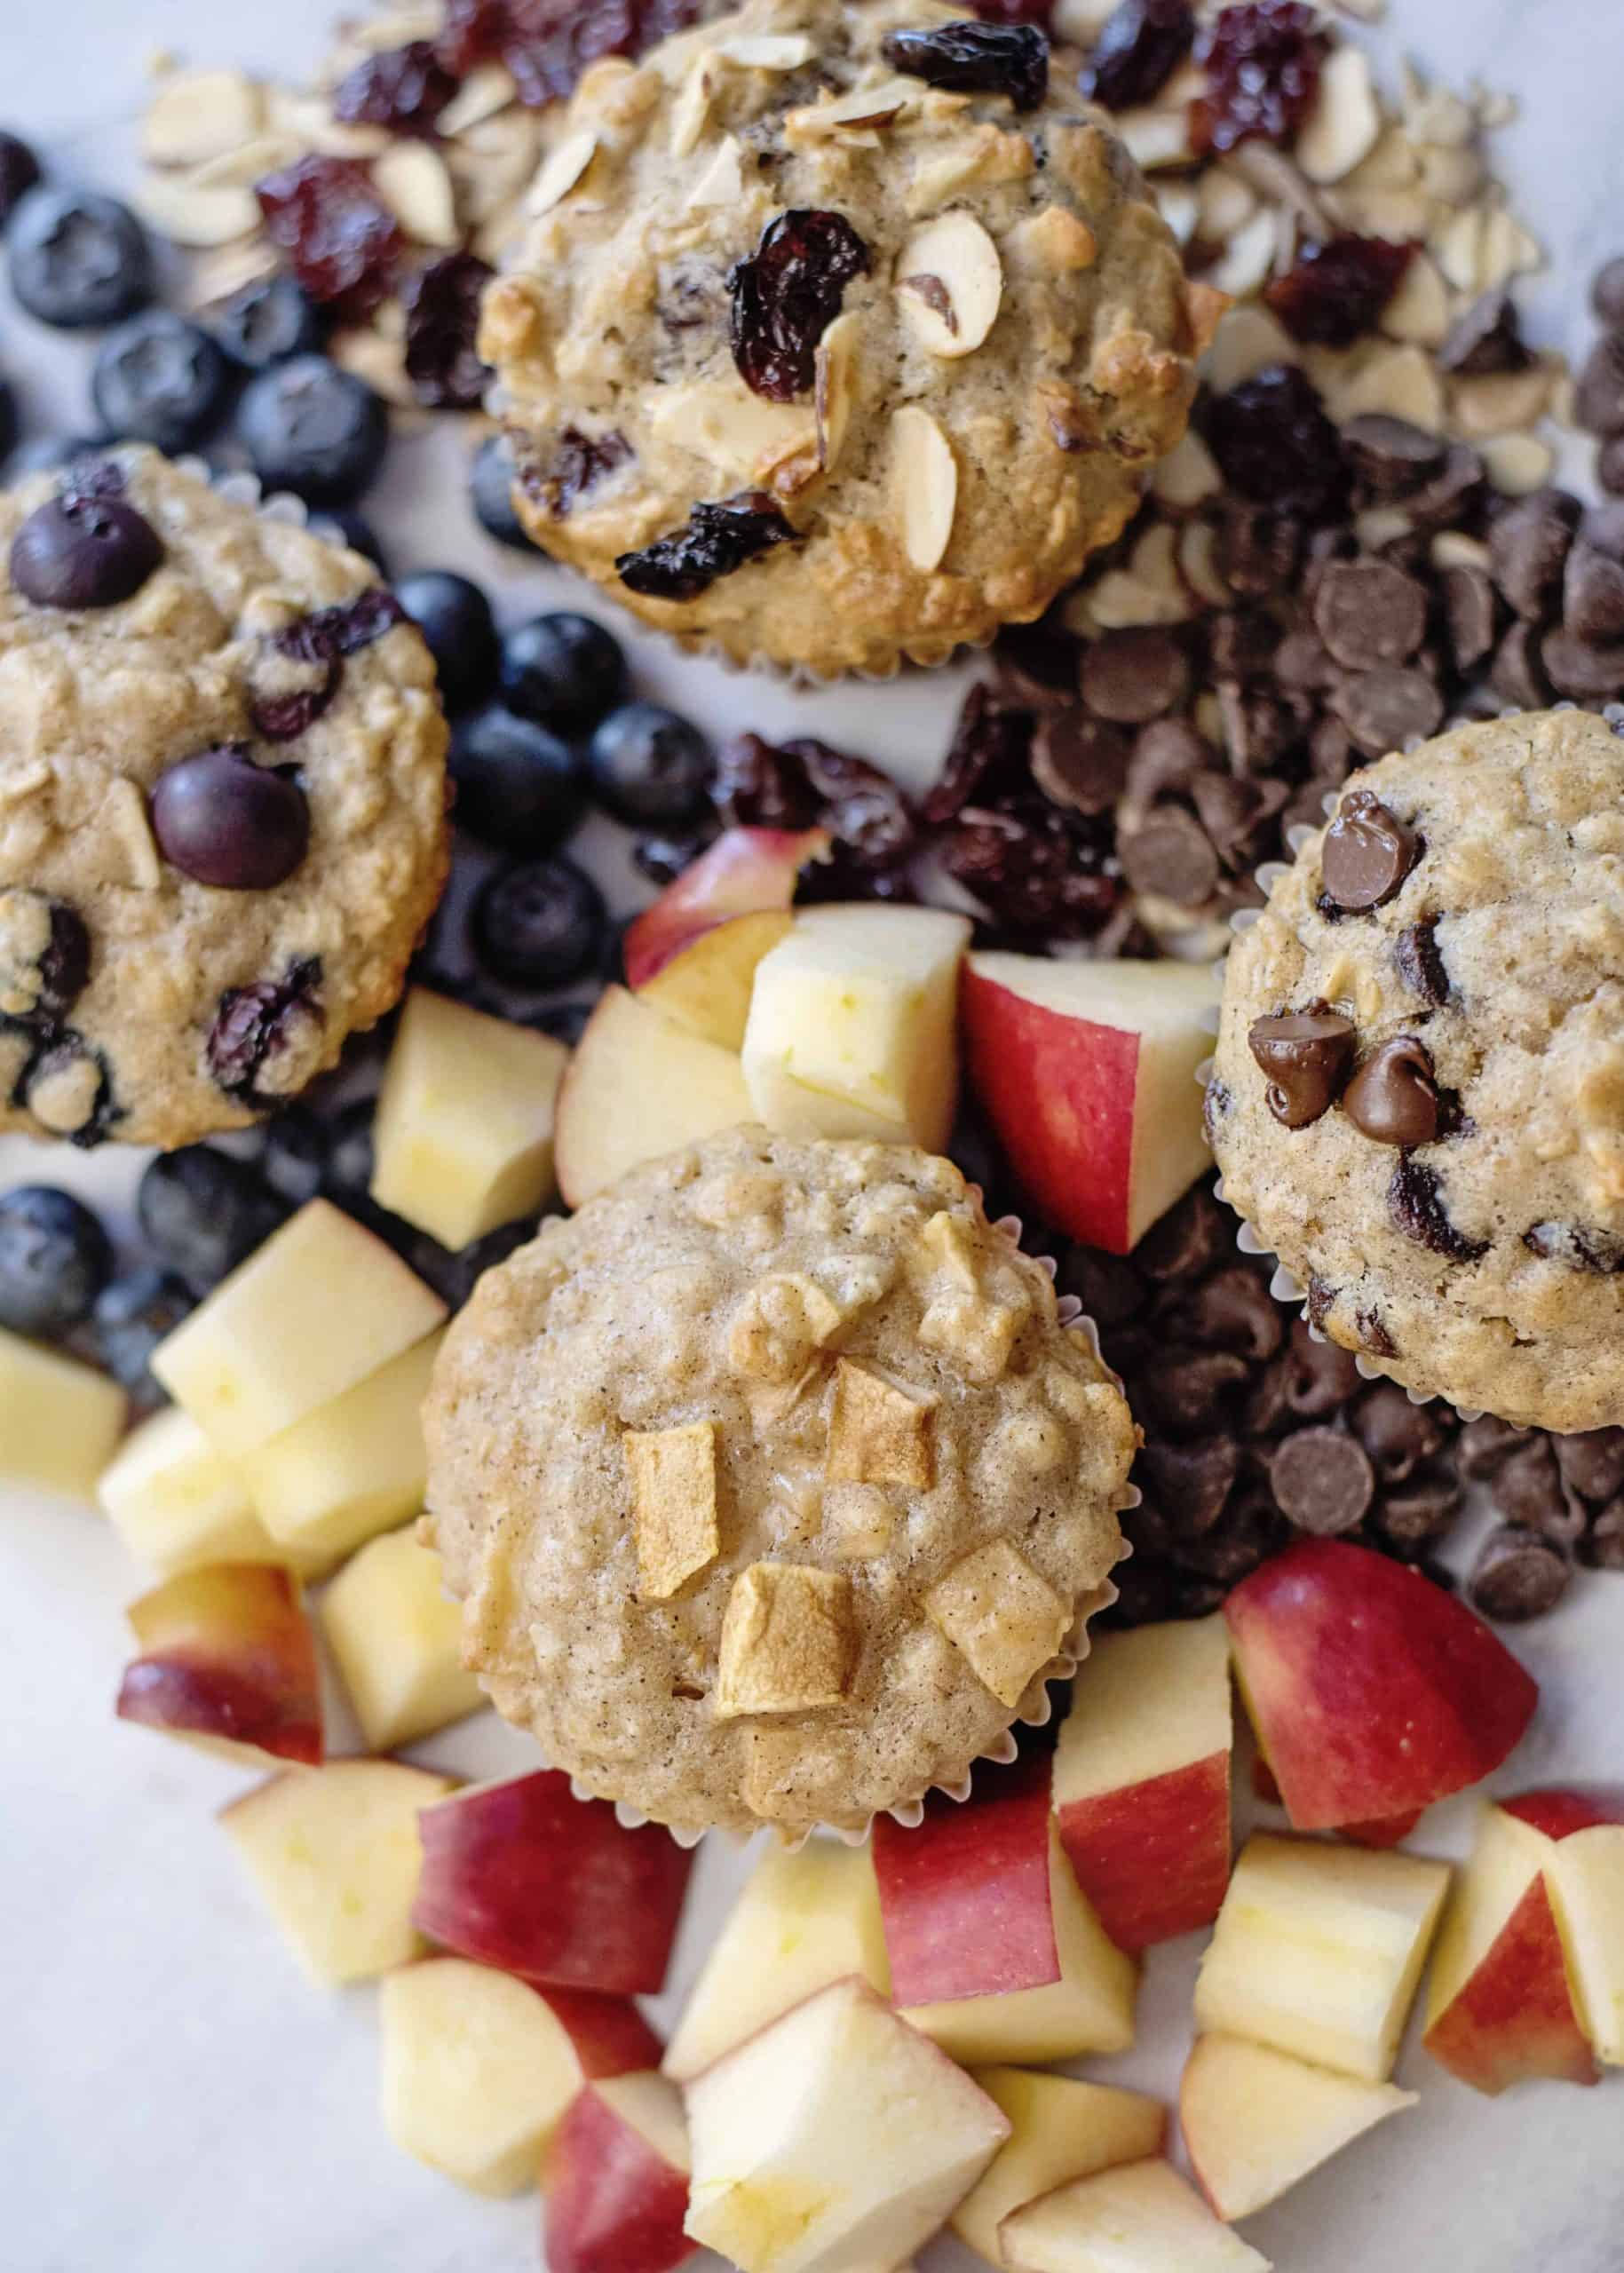 Oatmeal Muffins Recipe (Add Your Own Mix-Ins)